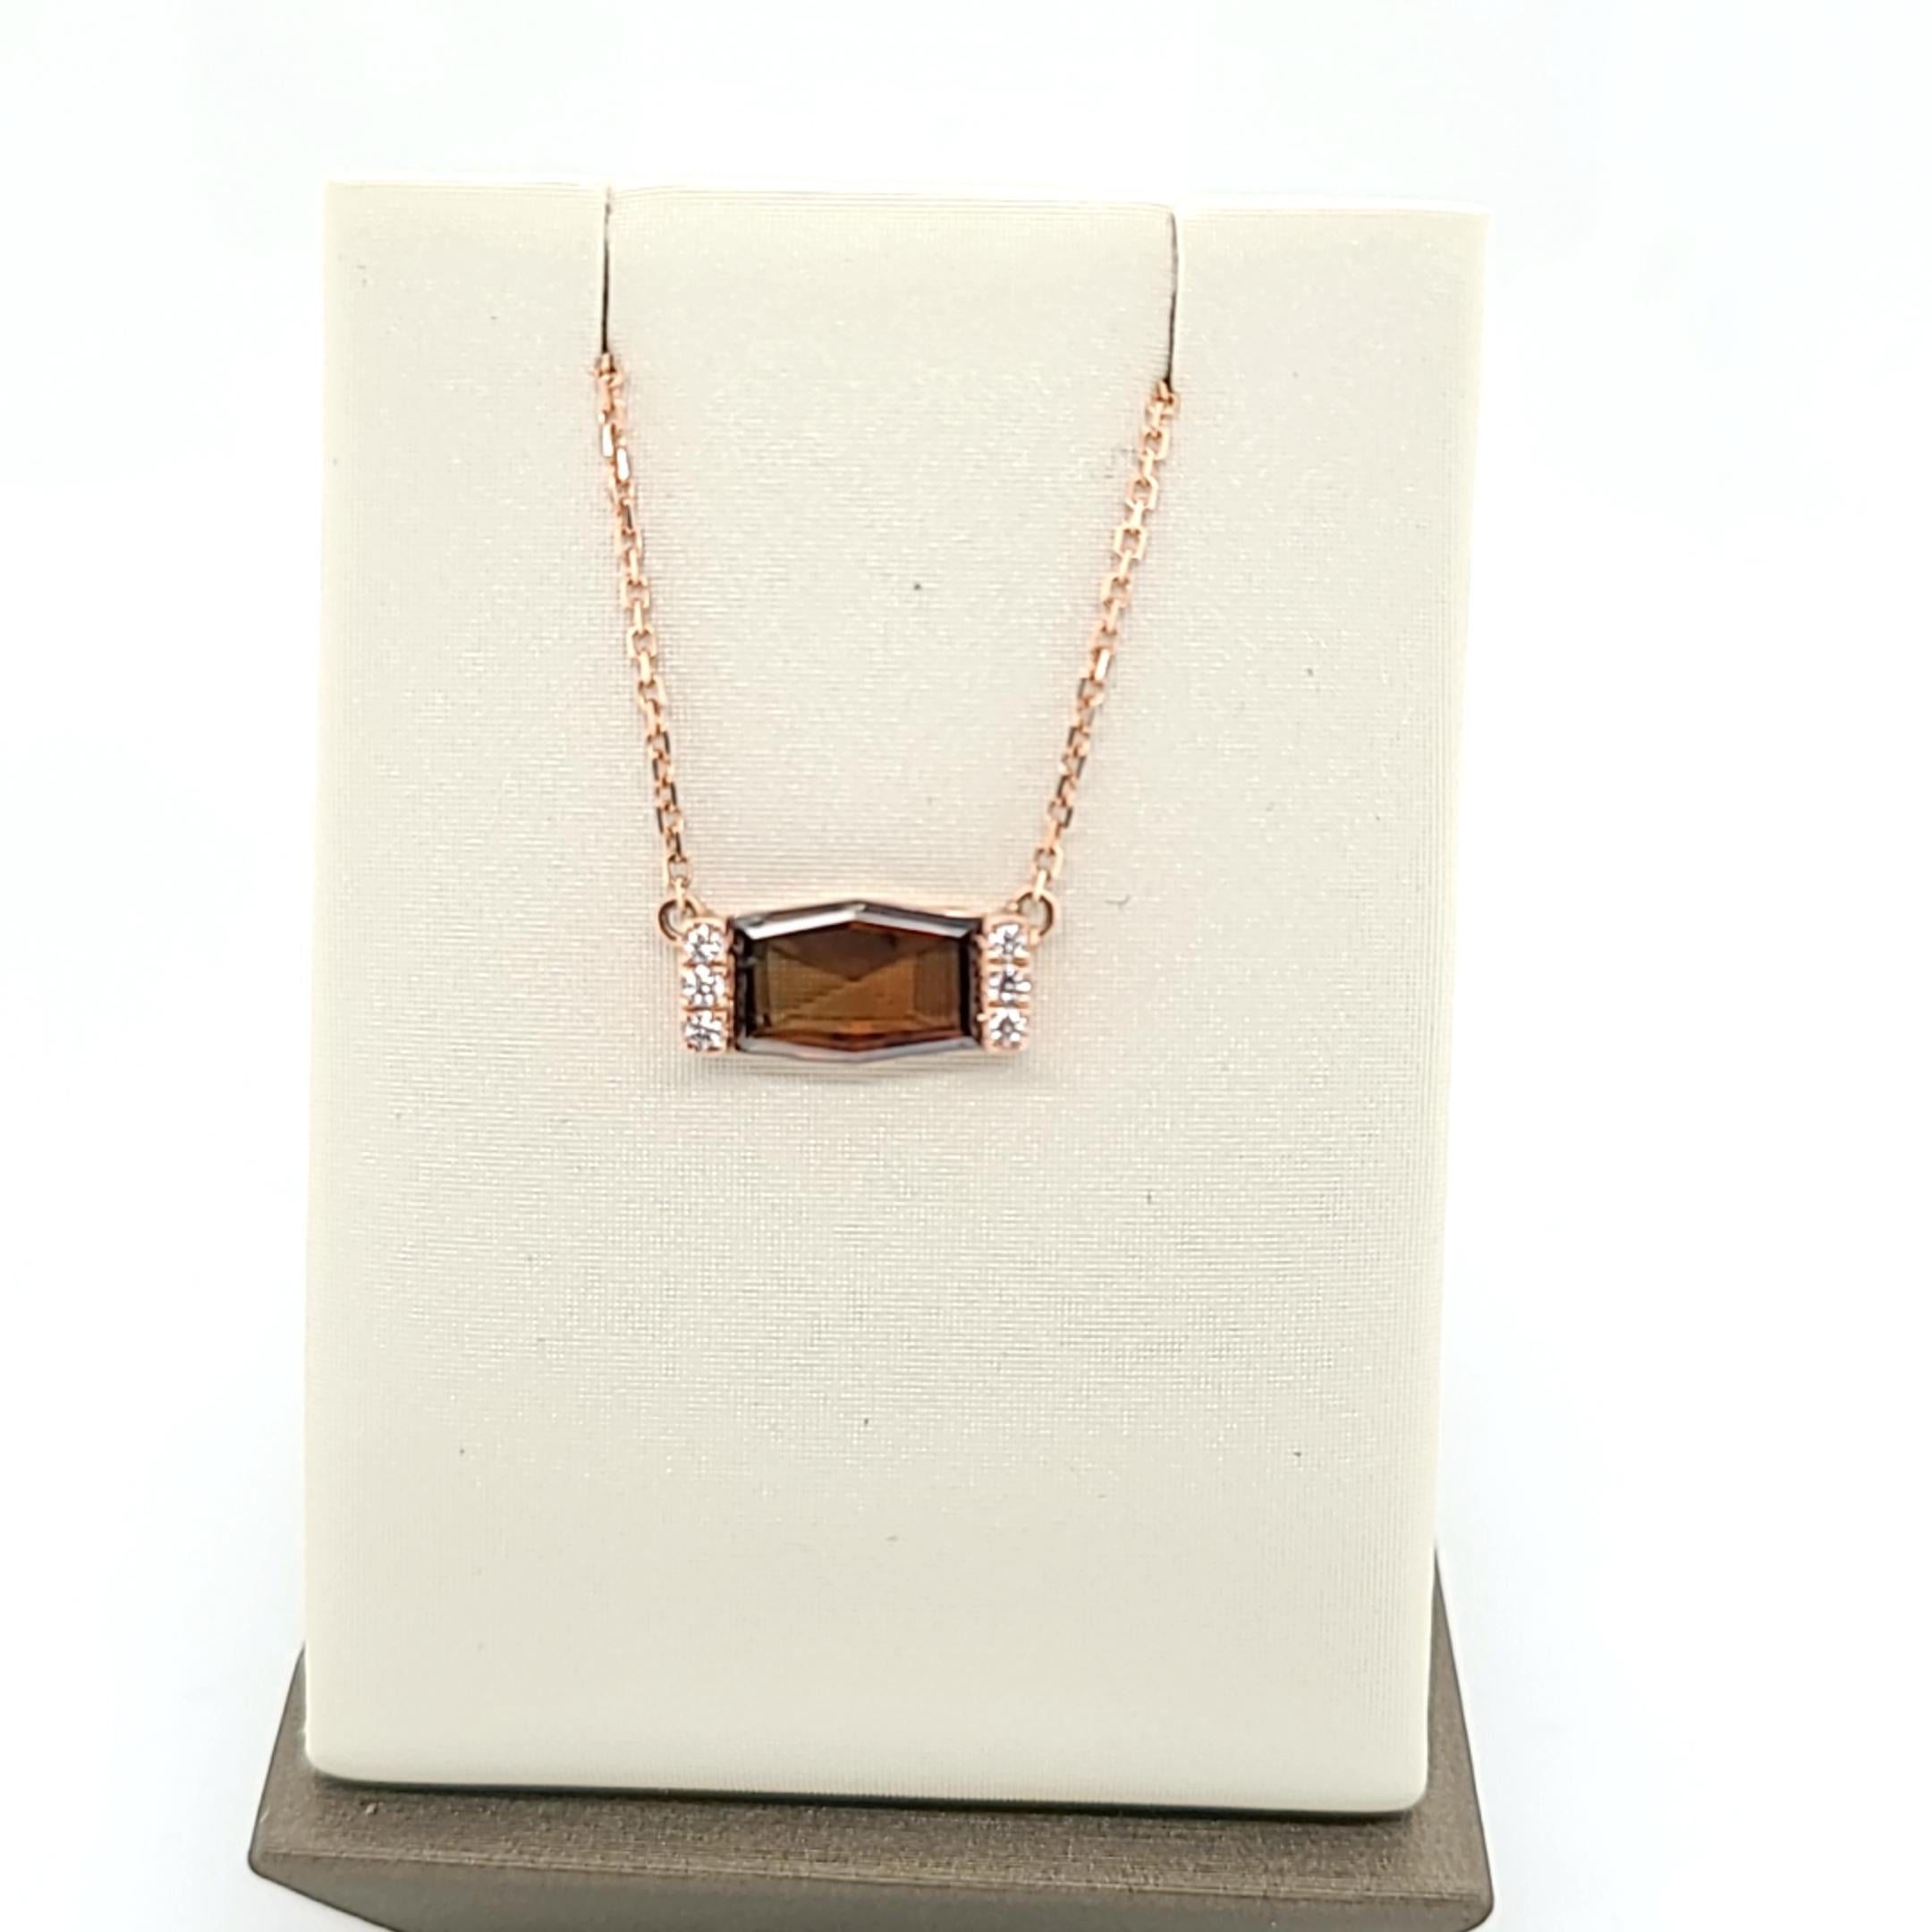 Make a captivating statement with this handcrafted hexagon diamond pendant, featuring a mesmerizing GIA Fancy Dark Orangy Brown Hexagon Diamond, certified with the unique number 1106636466. The distinct hexagon shape of the diamond adds a modern and